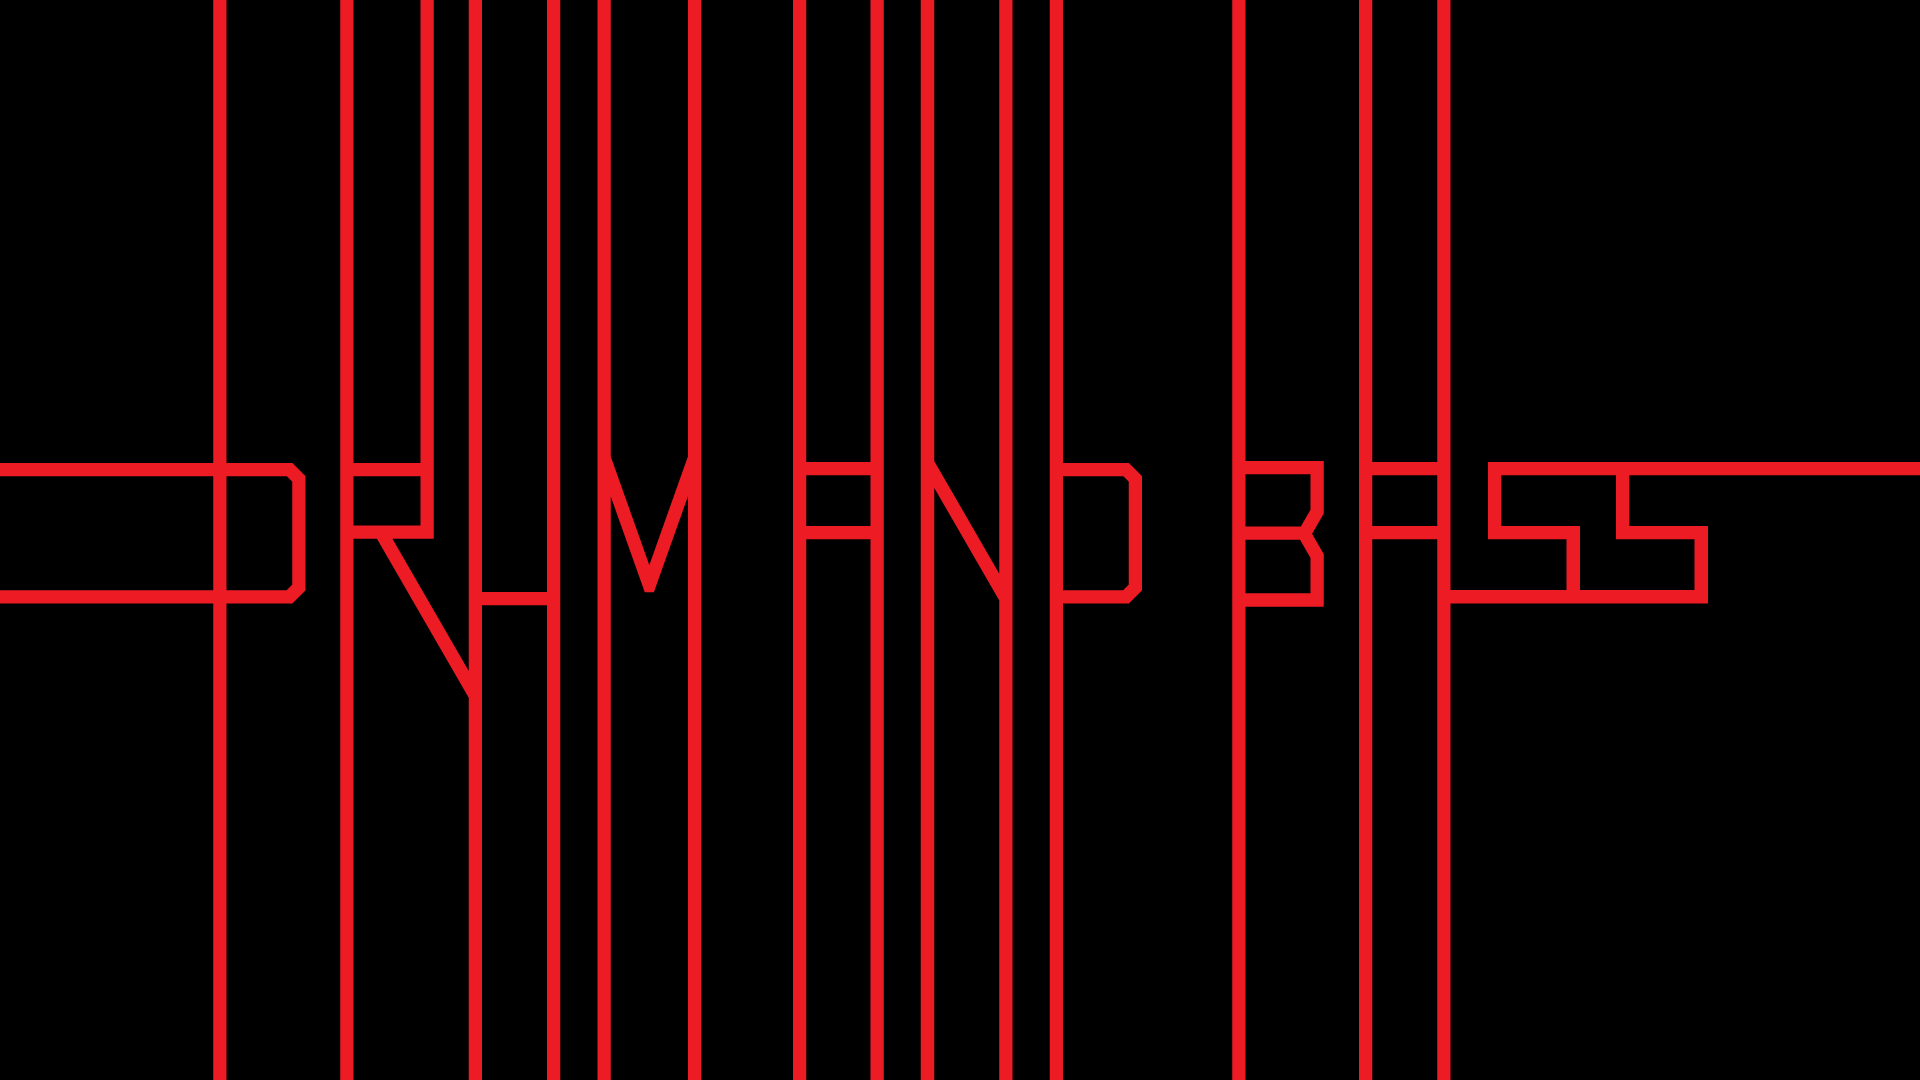 Red Line Art Simple Background Drum And Bass Music Typography Lines 1920x1080